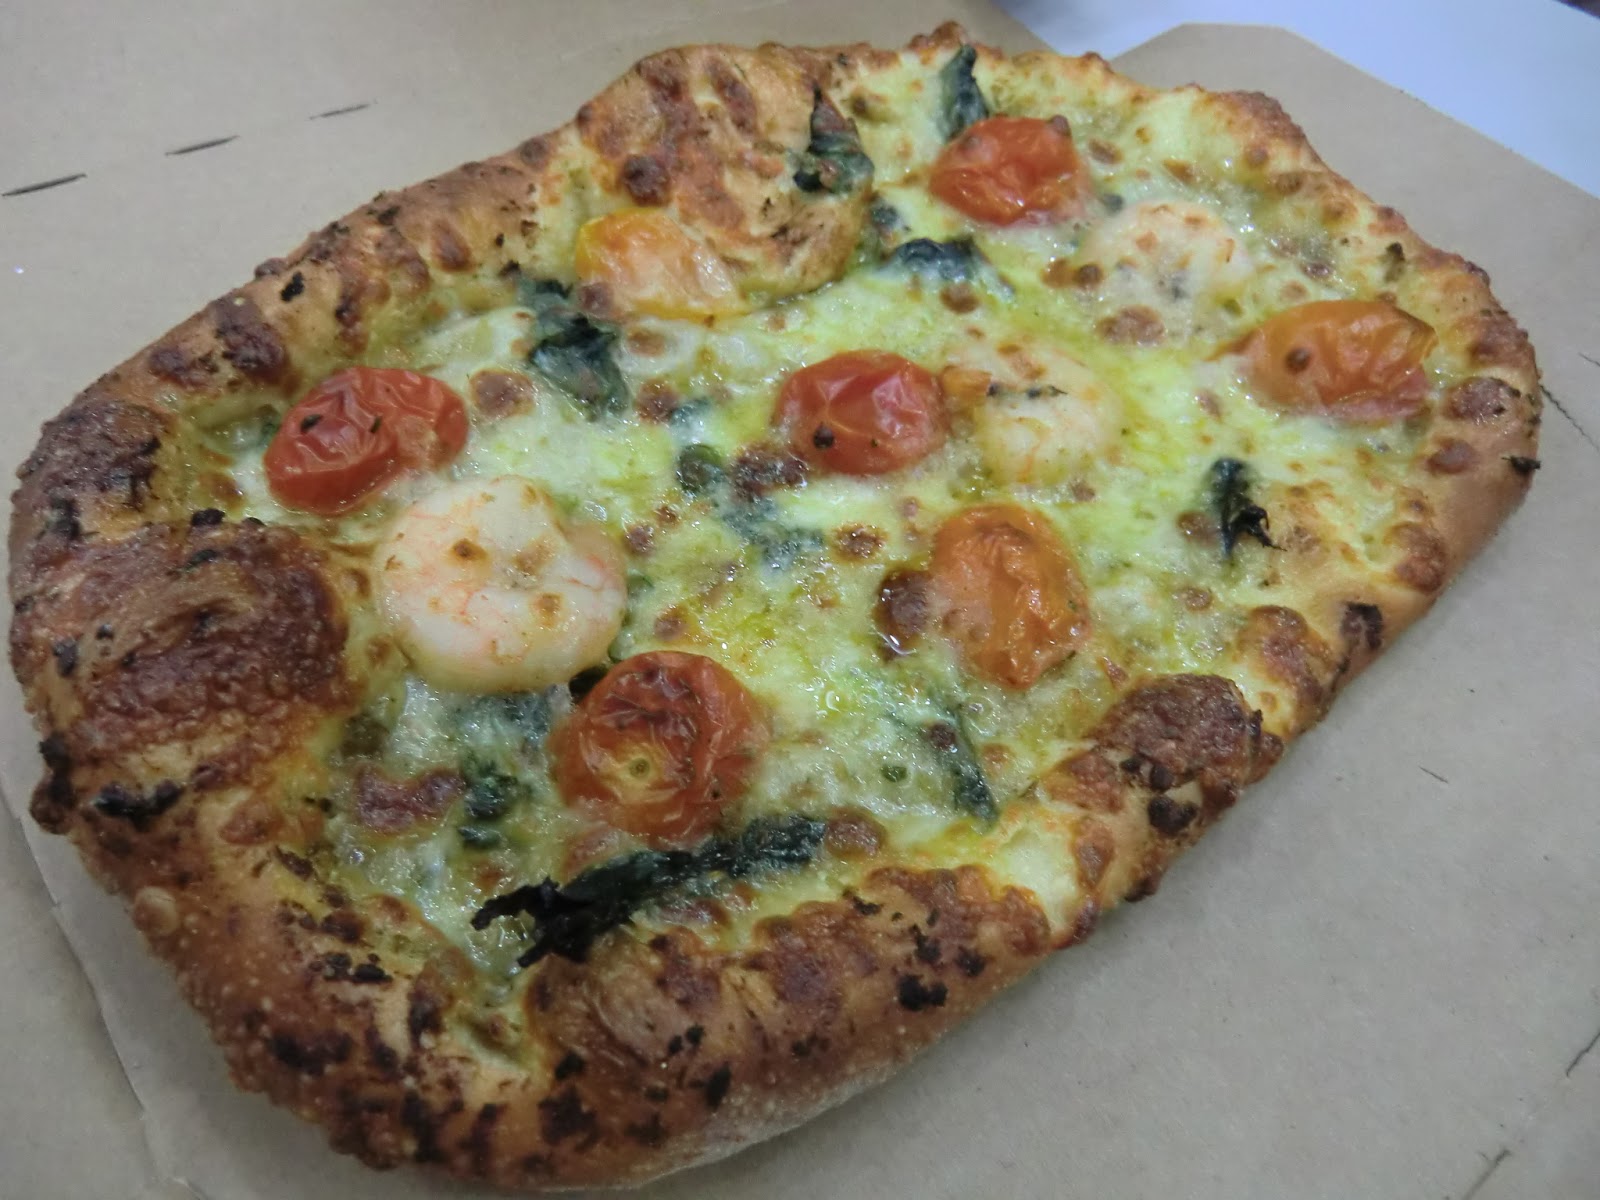 Singapore Food Beauty And Lifestyle Blogger Zerika Says Food Review Gourmet Licious Flatbreads Only At Domino S Pizza